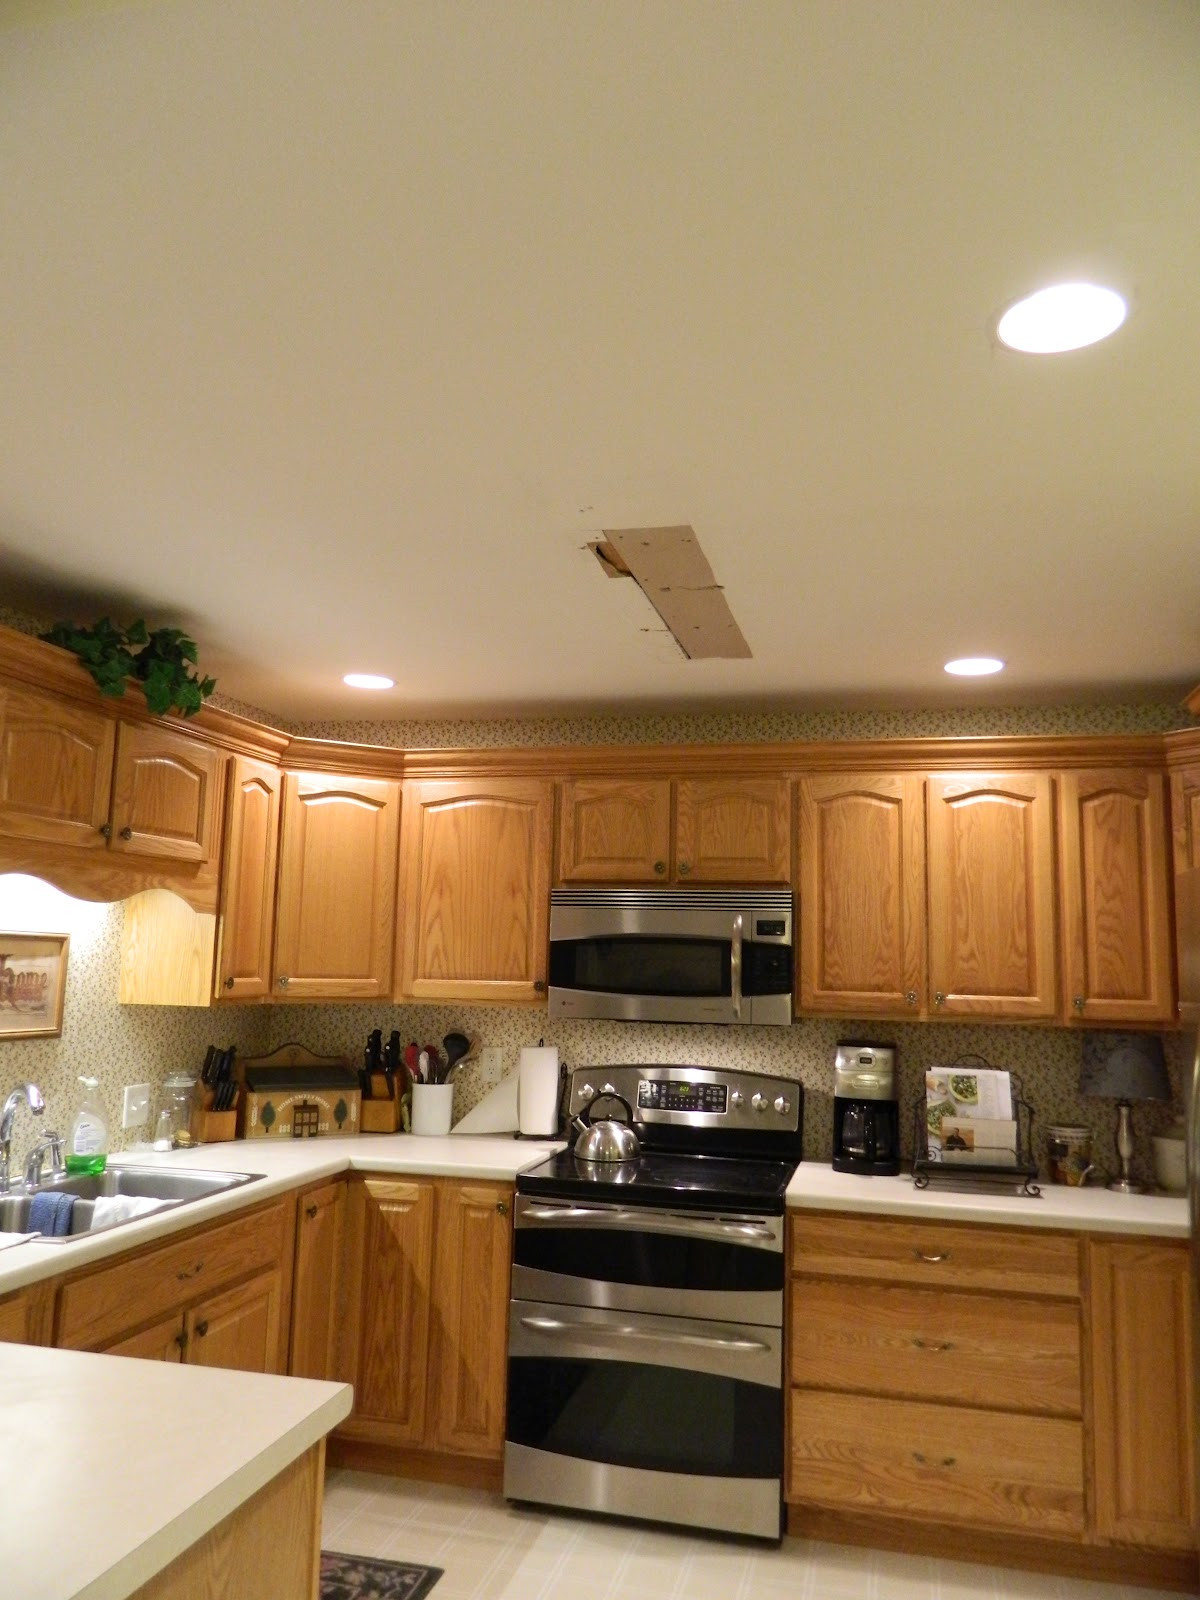 Ceiling Kitchen Lights
 Kitchen Ceiling Lights Ideas to Enlighten Cooking Times